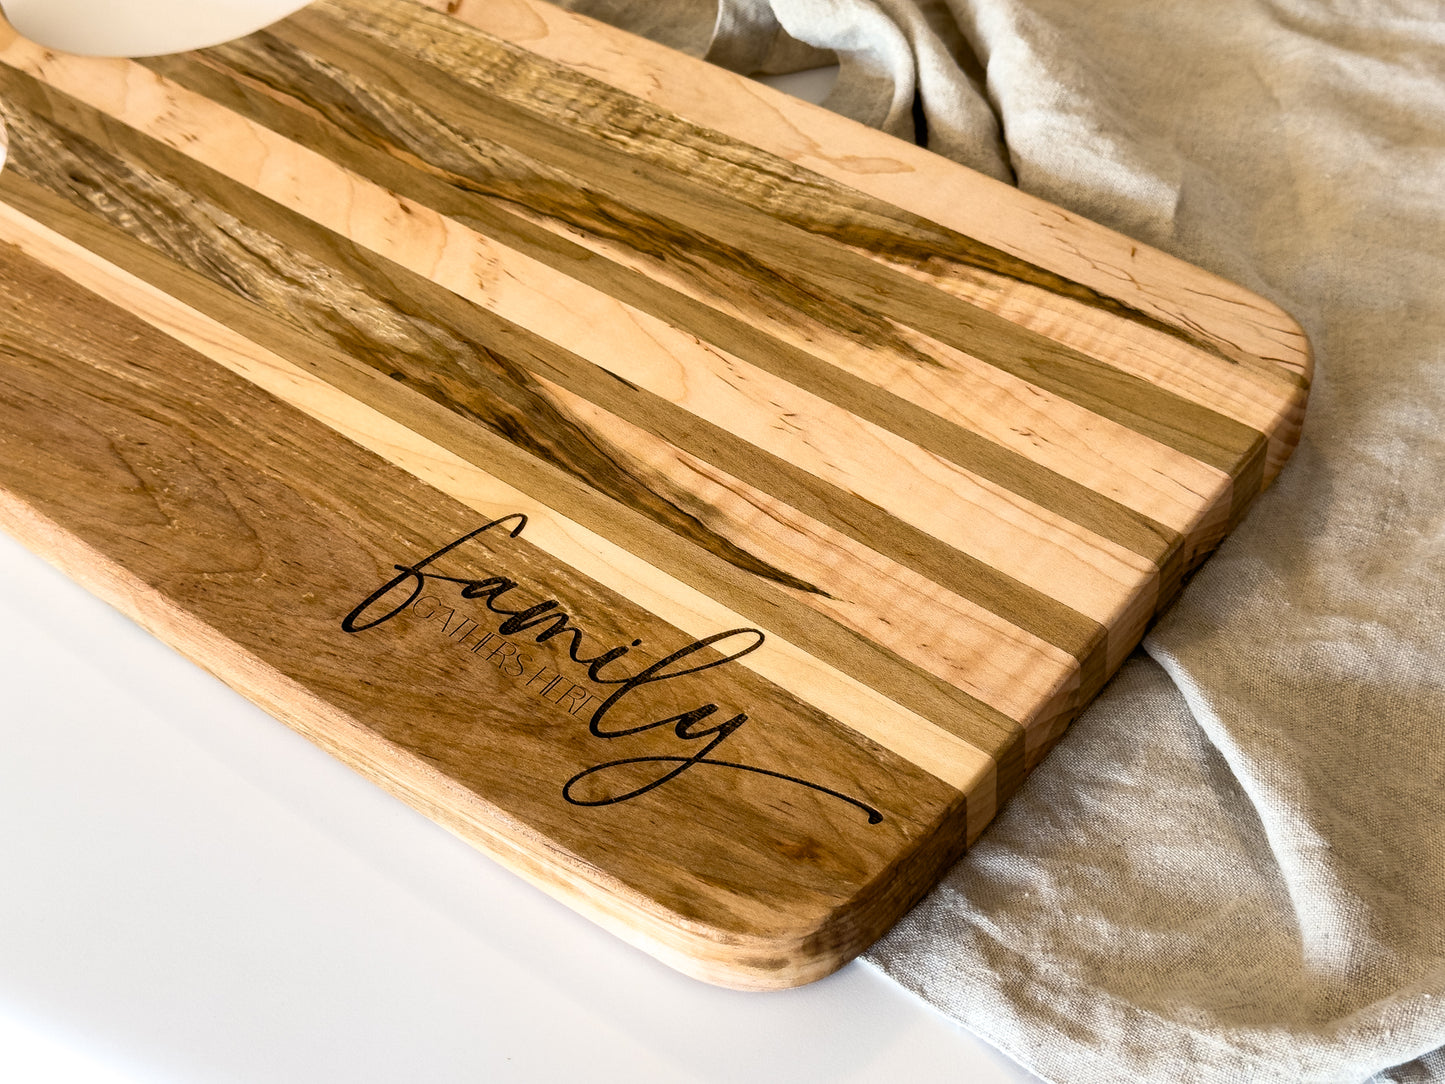 Engraved Solid Wood Charcuterie Board | Wood Cutting Board With Handle